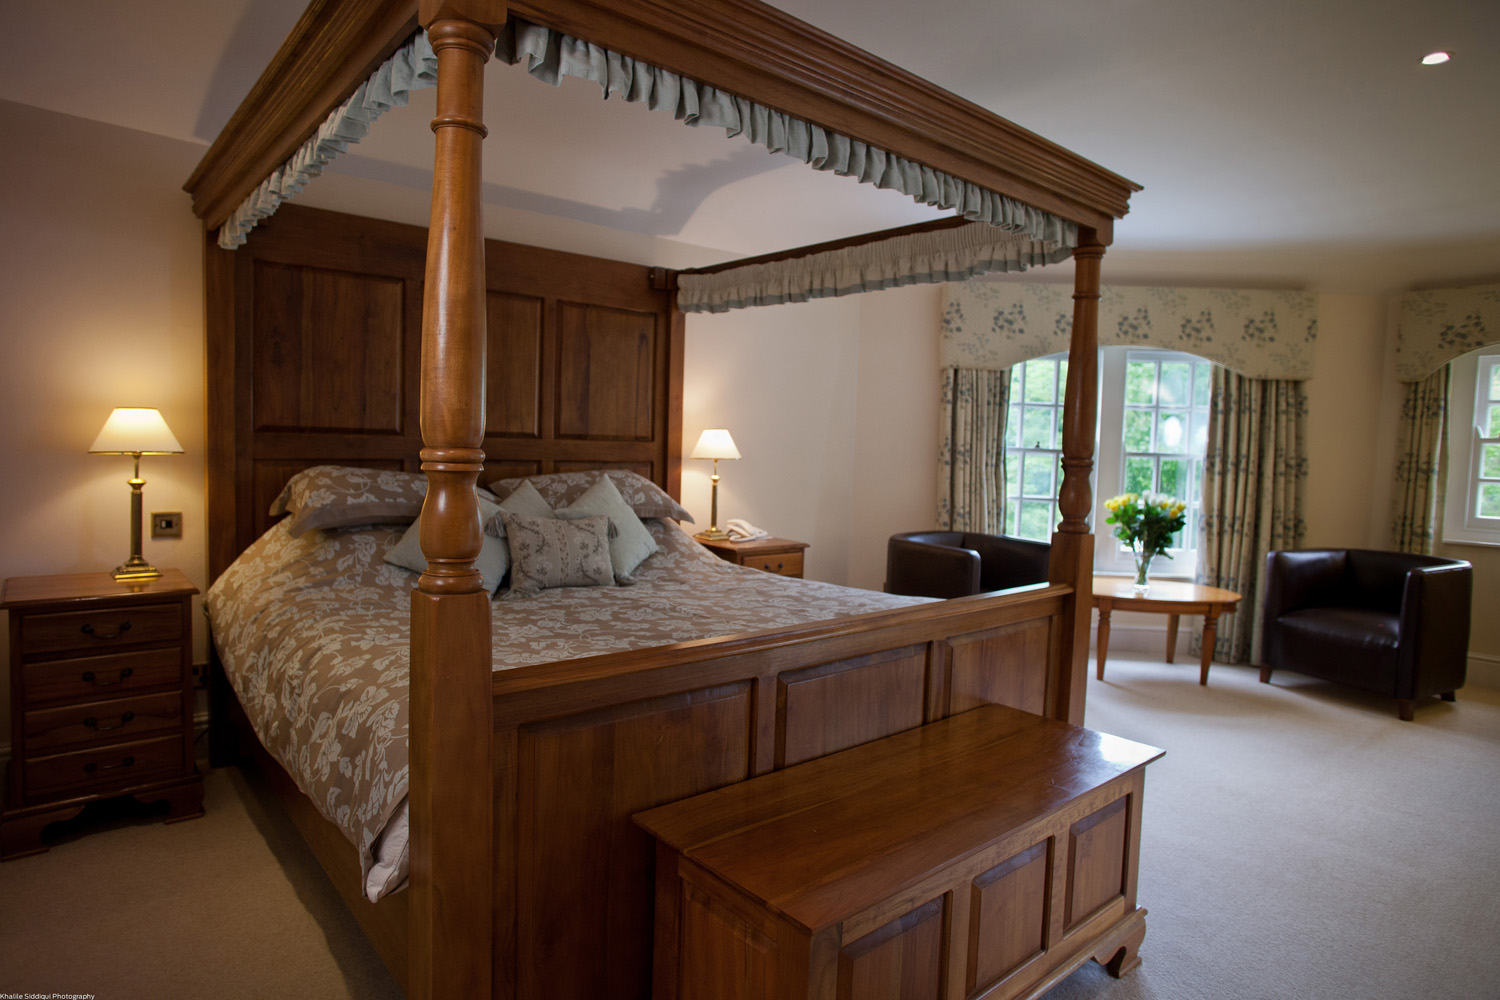 Suites at Rose in Vale Country House Hotel